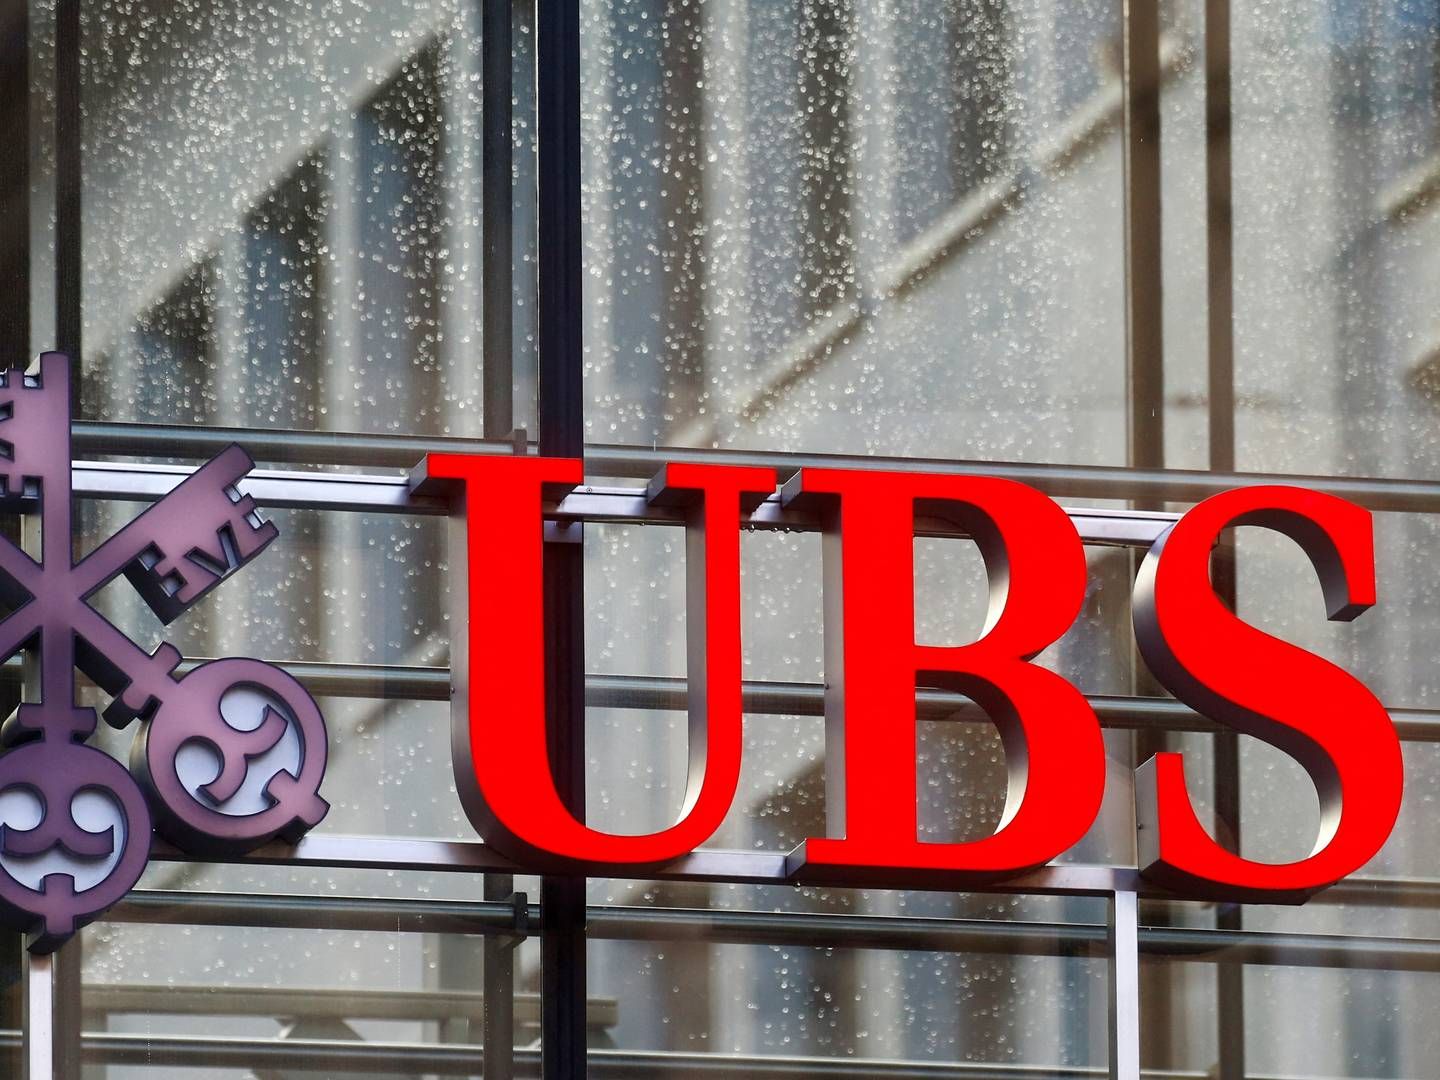 UBS Asset Management will be downgrading several Article 9 index-tracking funds, according to media reports. | Photo: ARND WIEGMANN/REUTERS / X90184